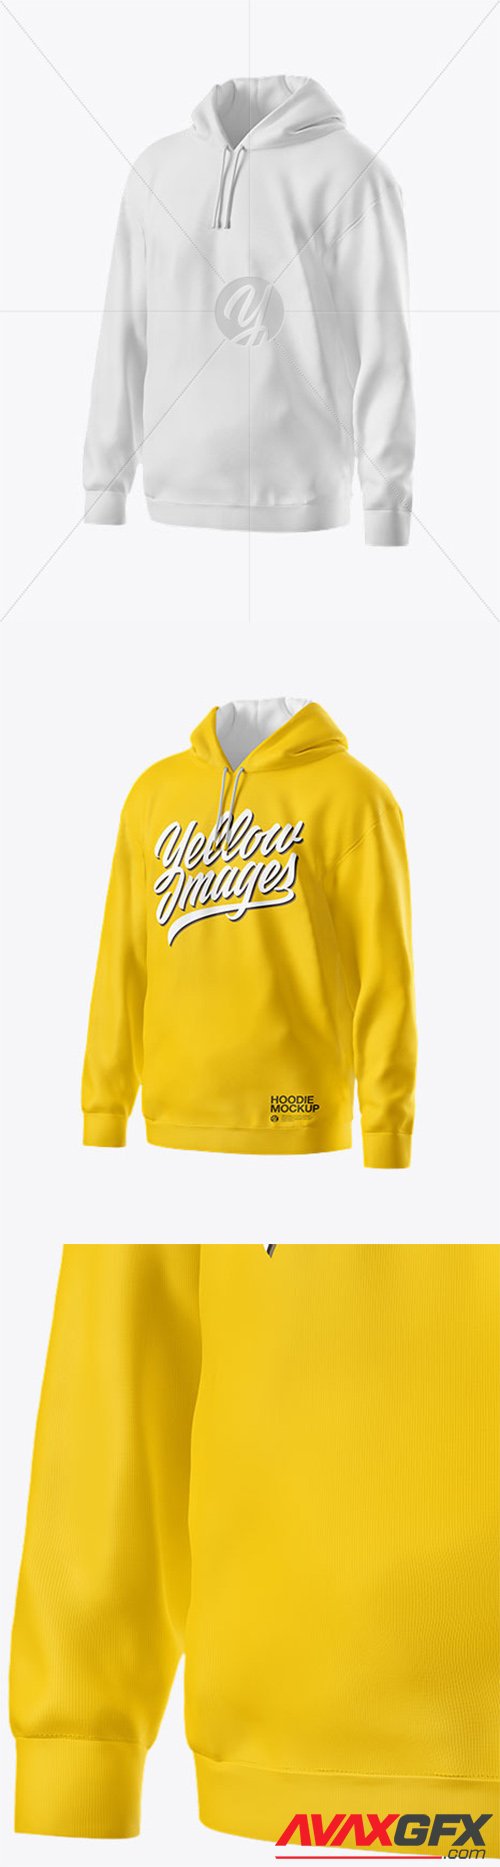 Download Hoodie Mockup - Half Side View 67018 » AVAXGFX - All Downloads that You Need in One Place ...